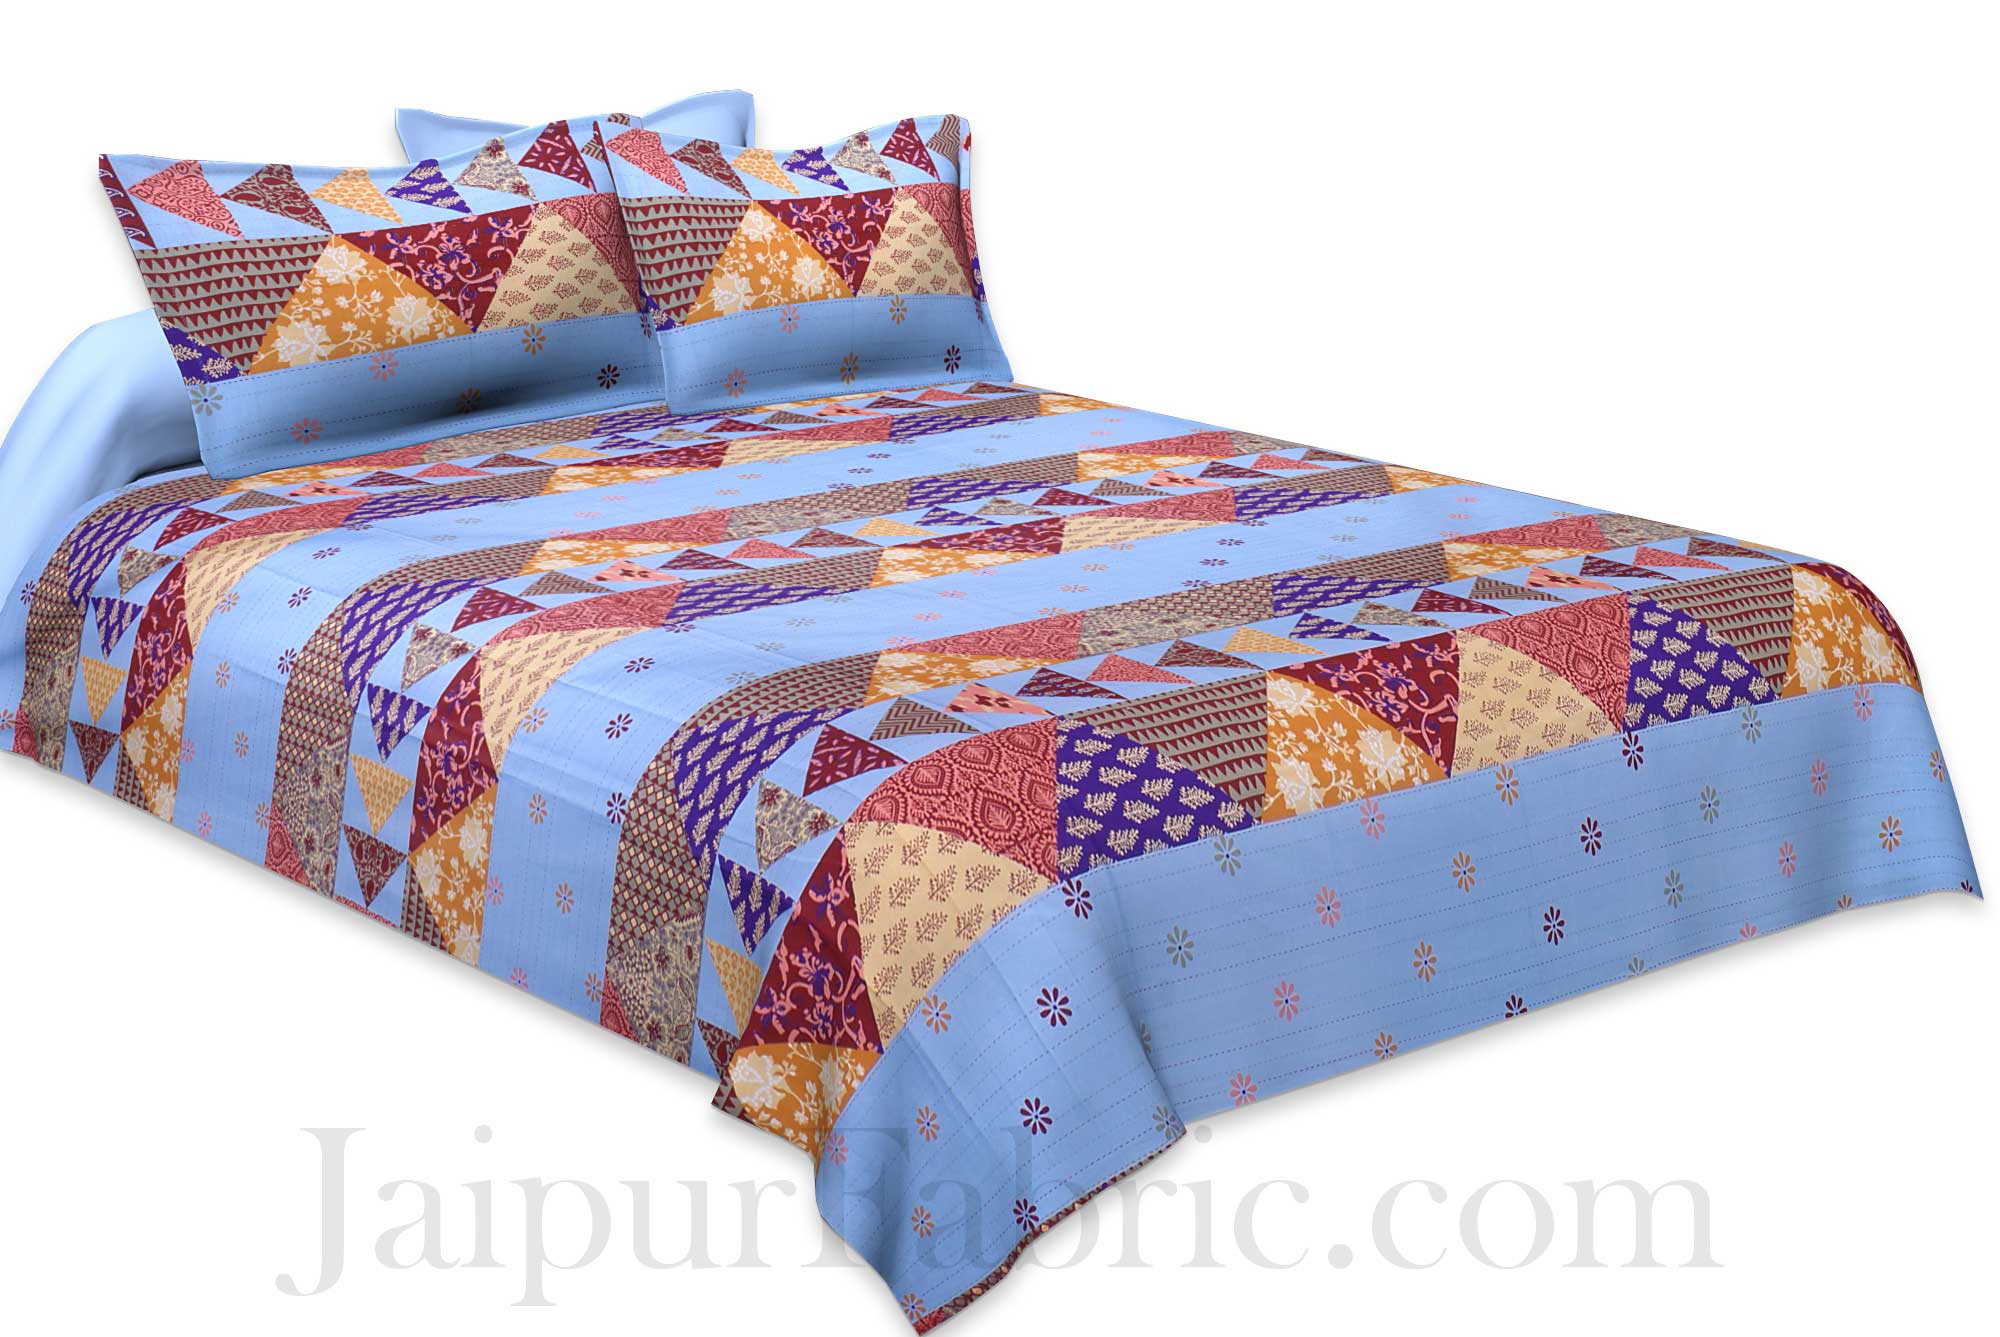 Blues Twill Cotton  Double Bedsheet With Colorful Patchwork Design